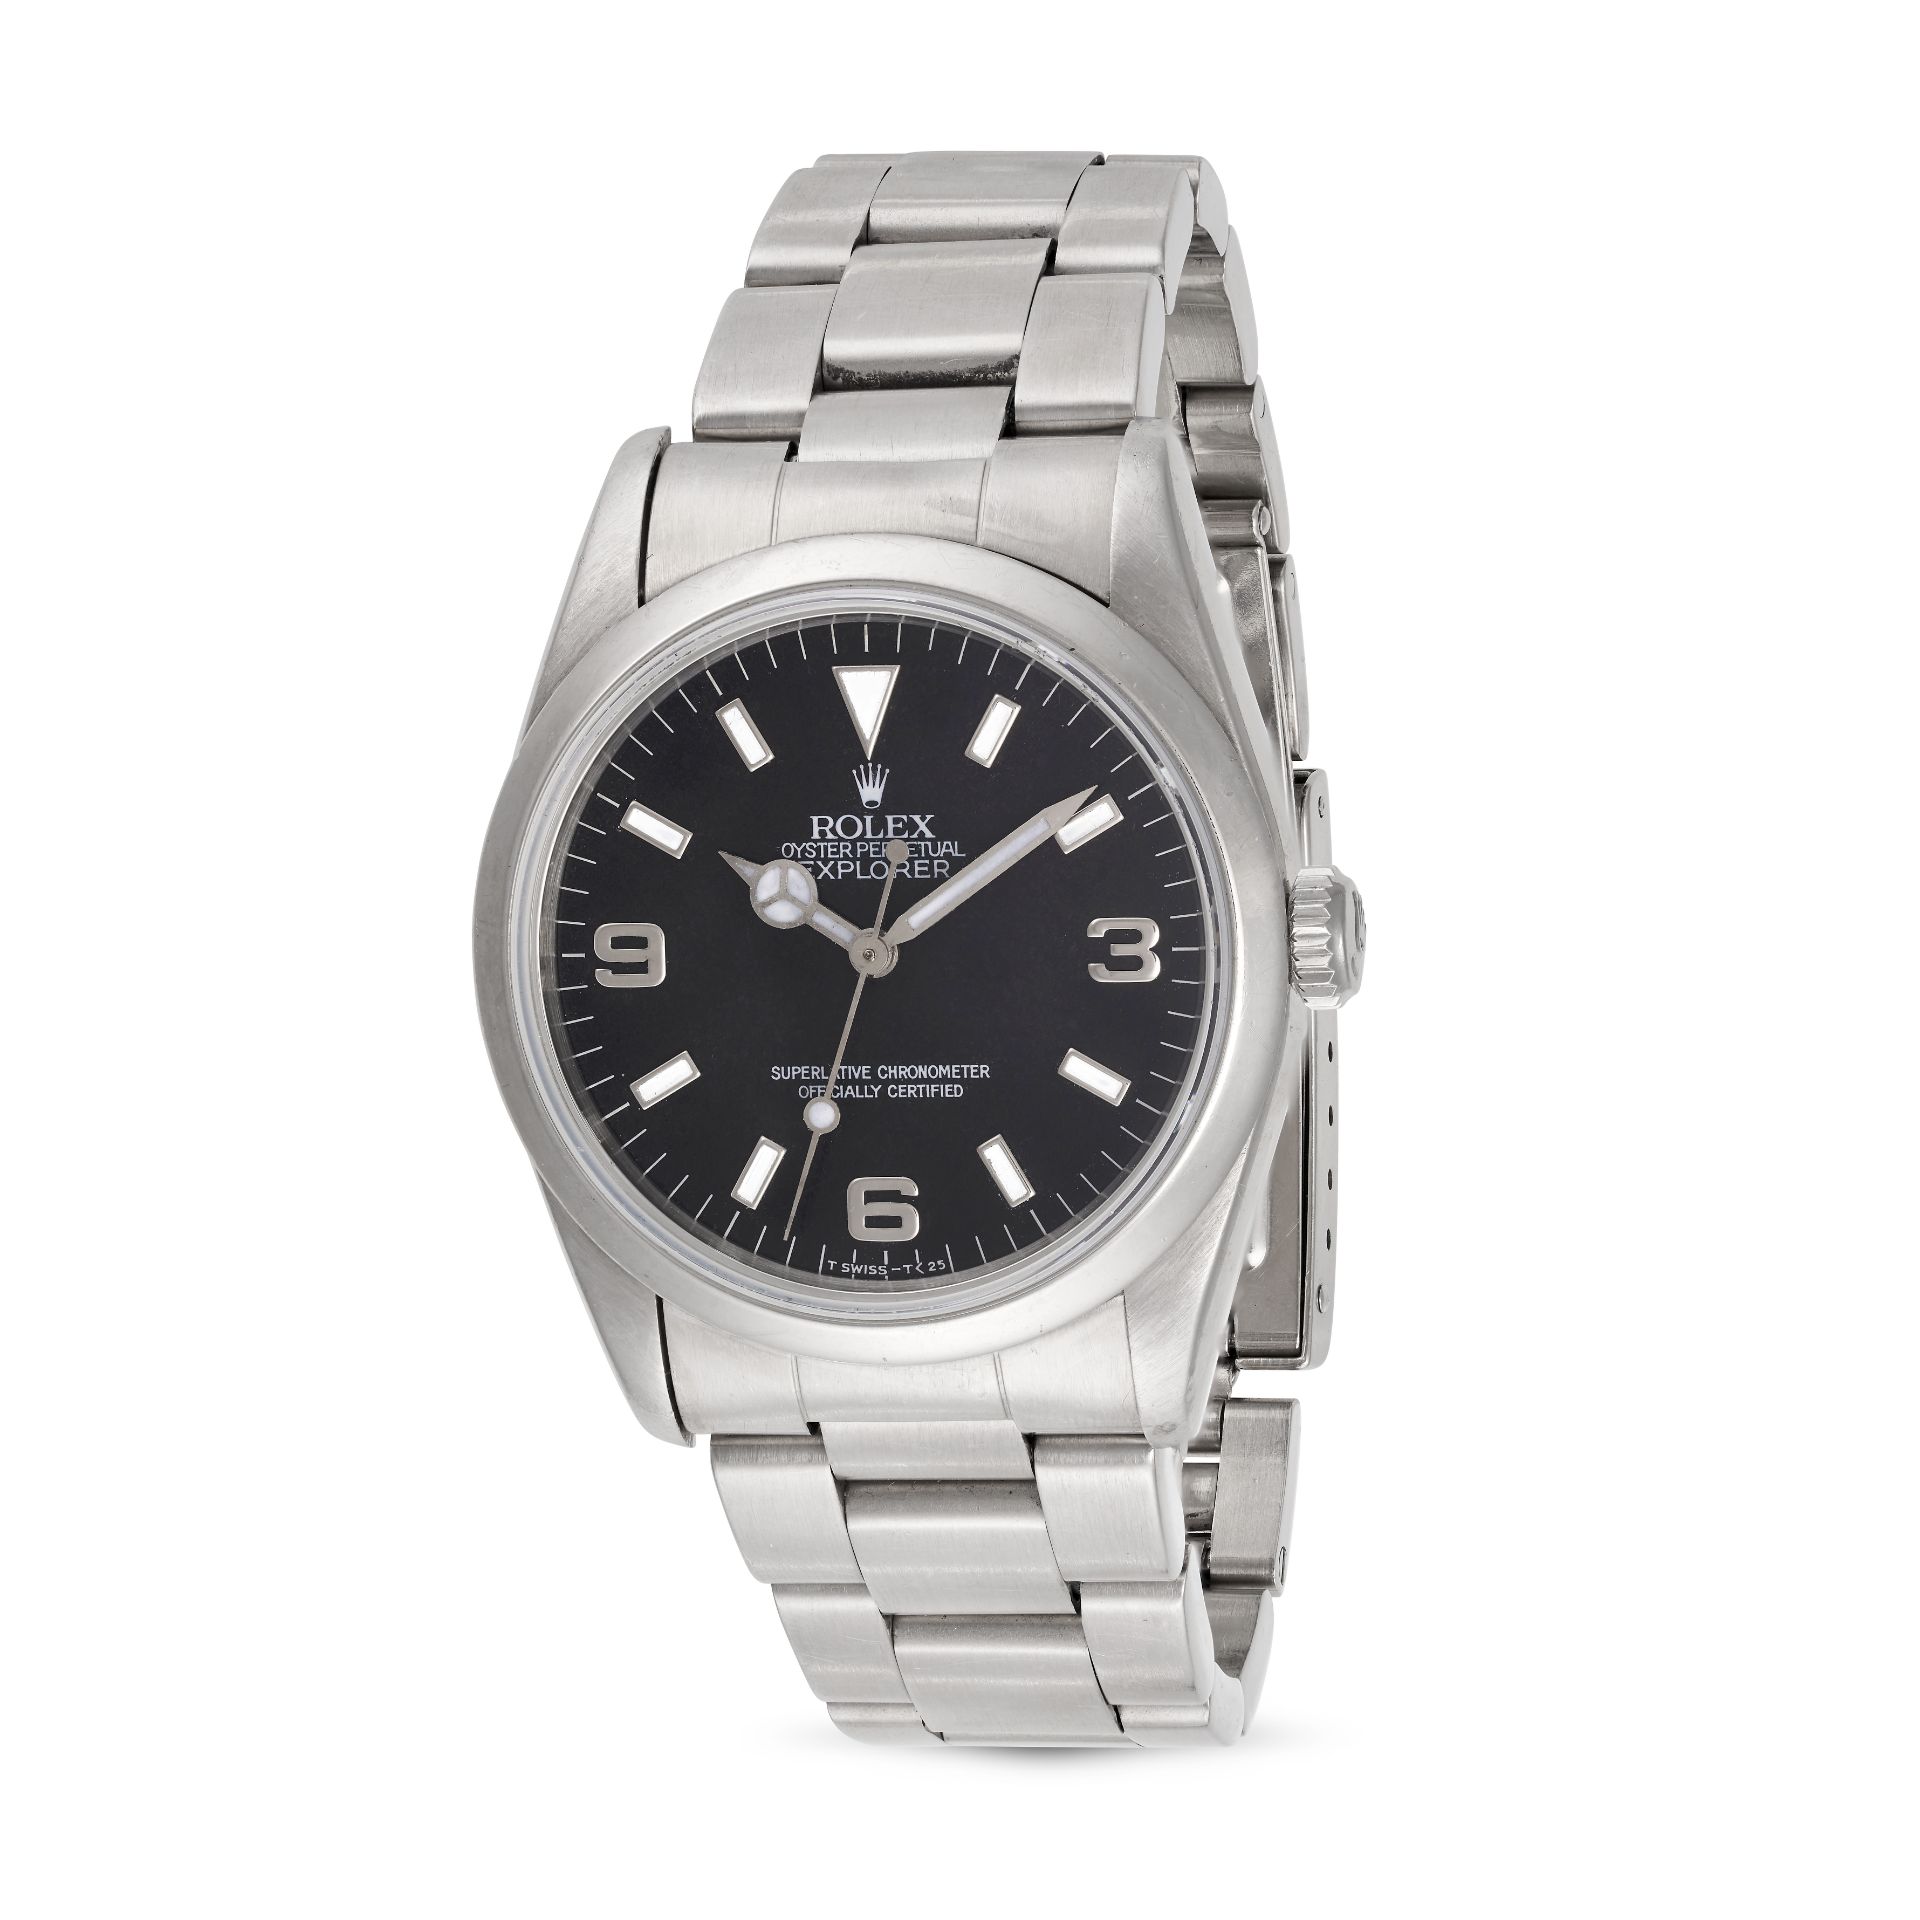 ROLEX - A ROLEX OYSTER PERPETUAL EXPLORER I in stainless steel, 14270 8884XXX, the circular black...